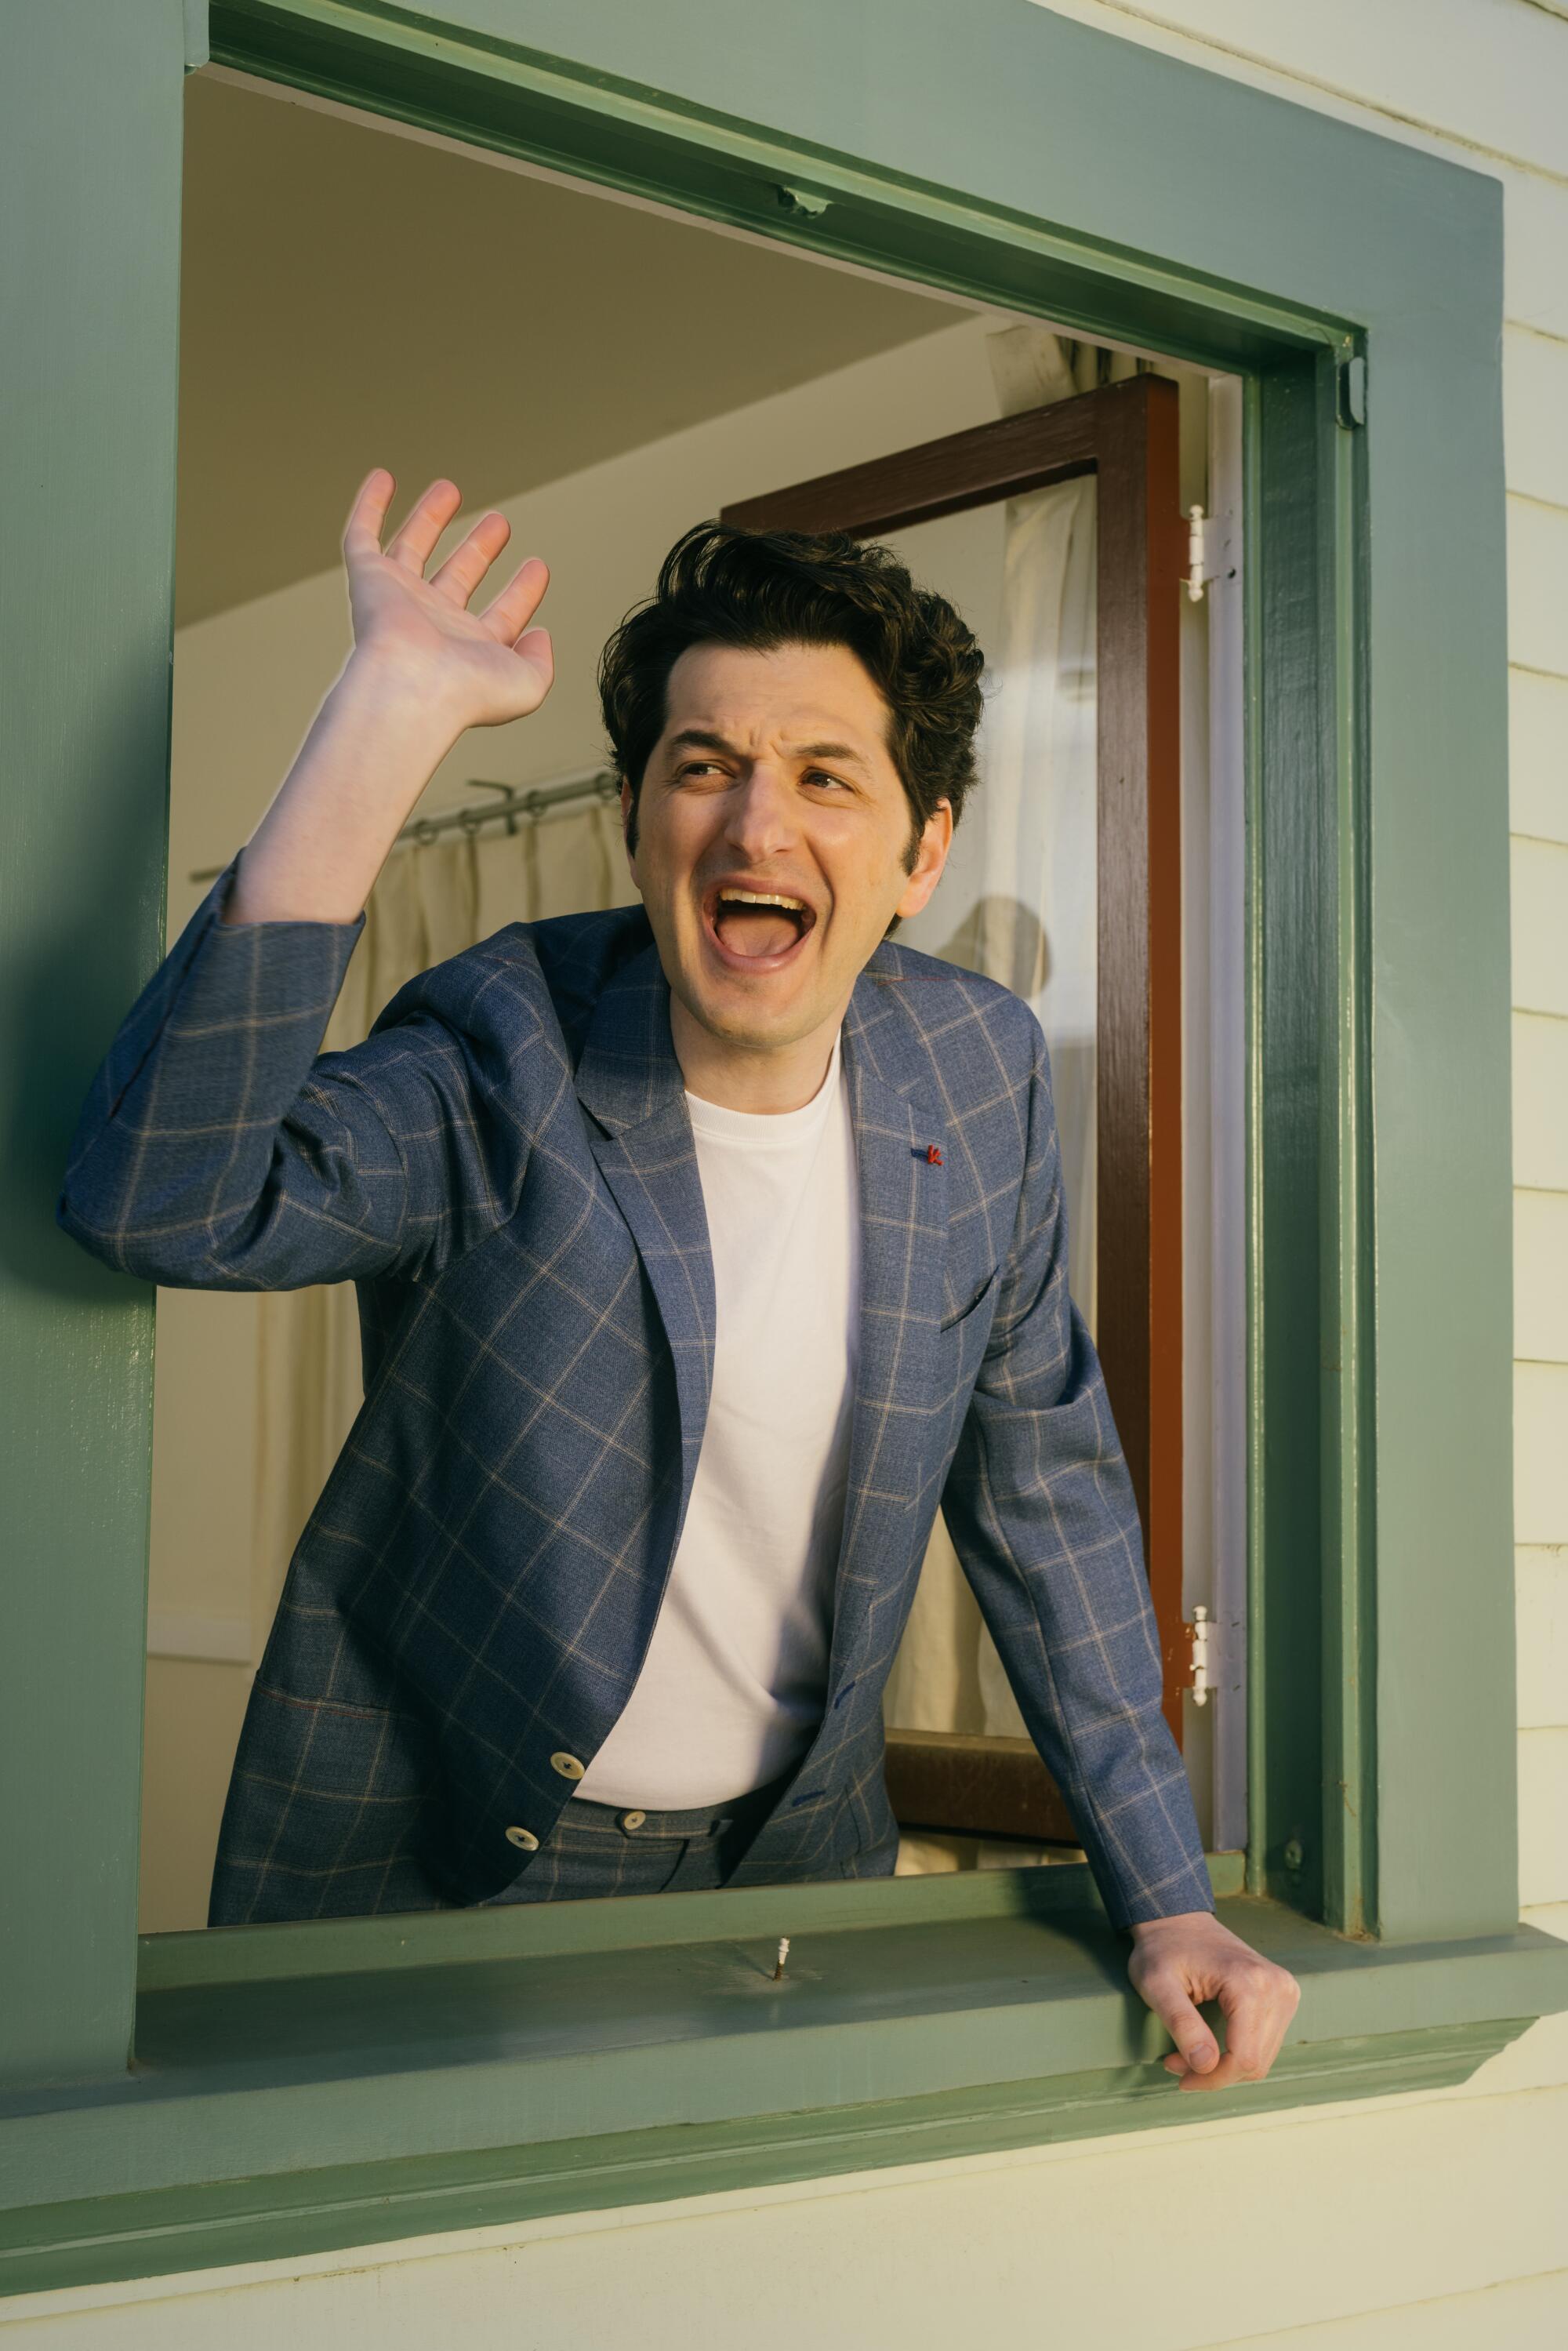 Ben Schwartz poses for a photo by yelling out of a window.